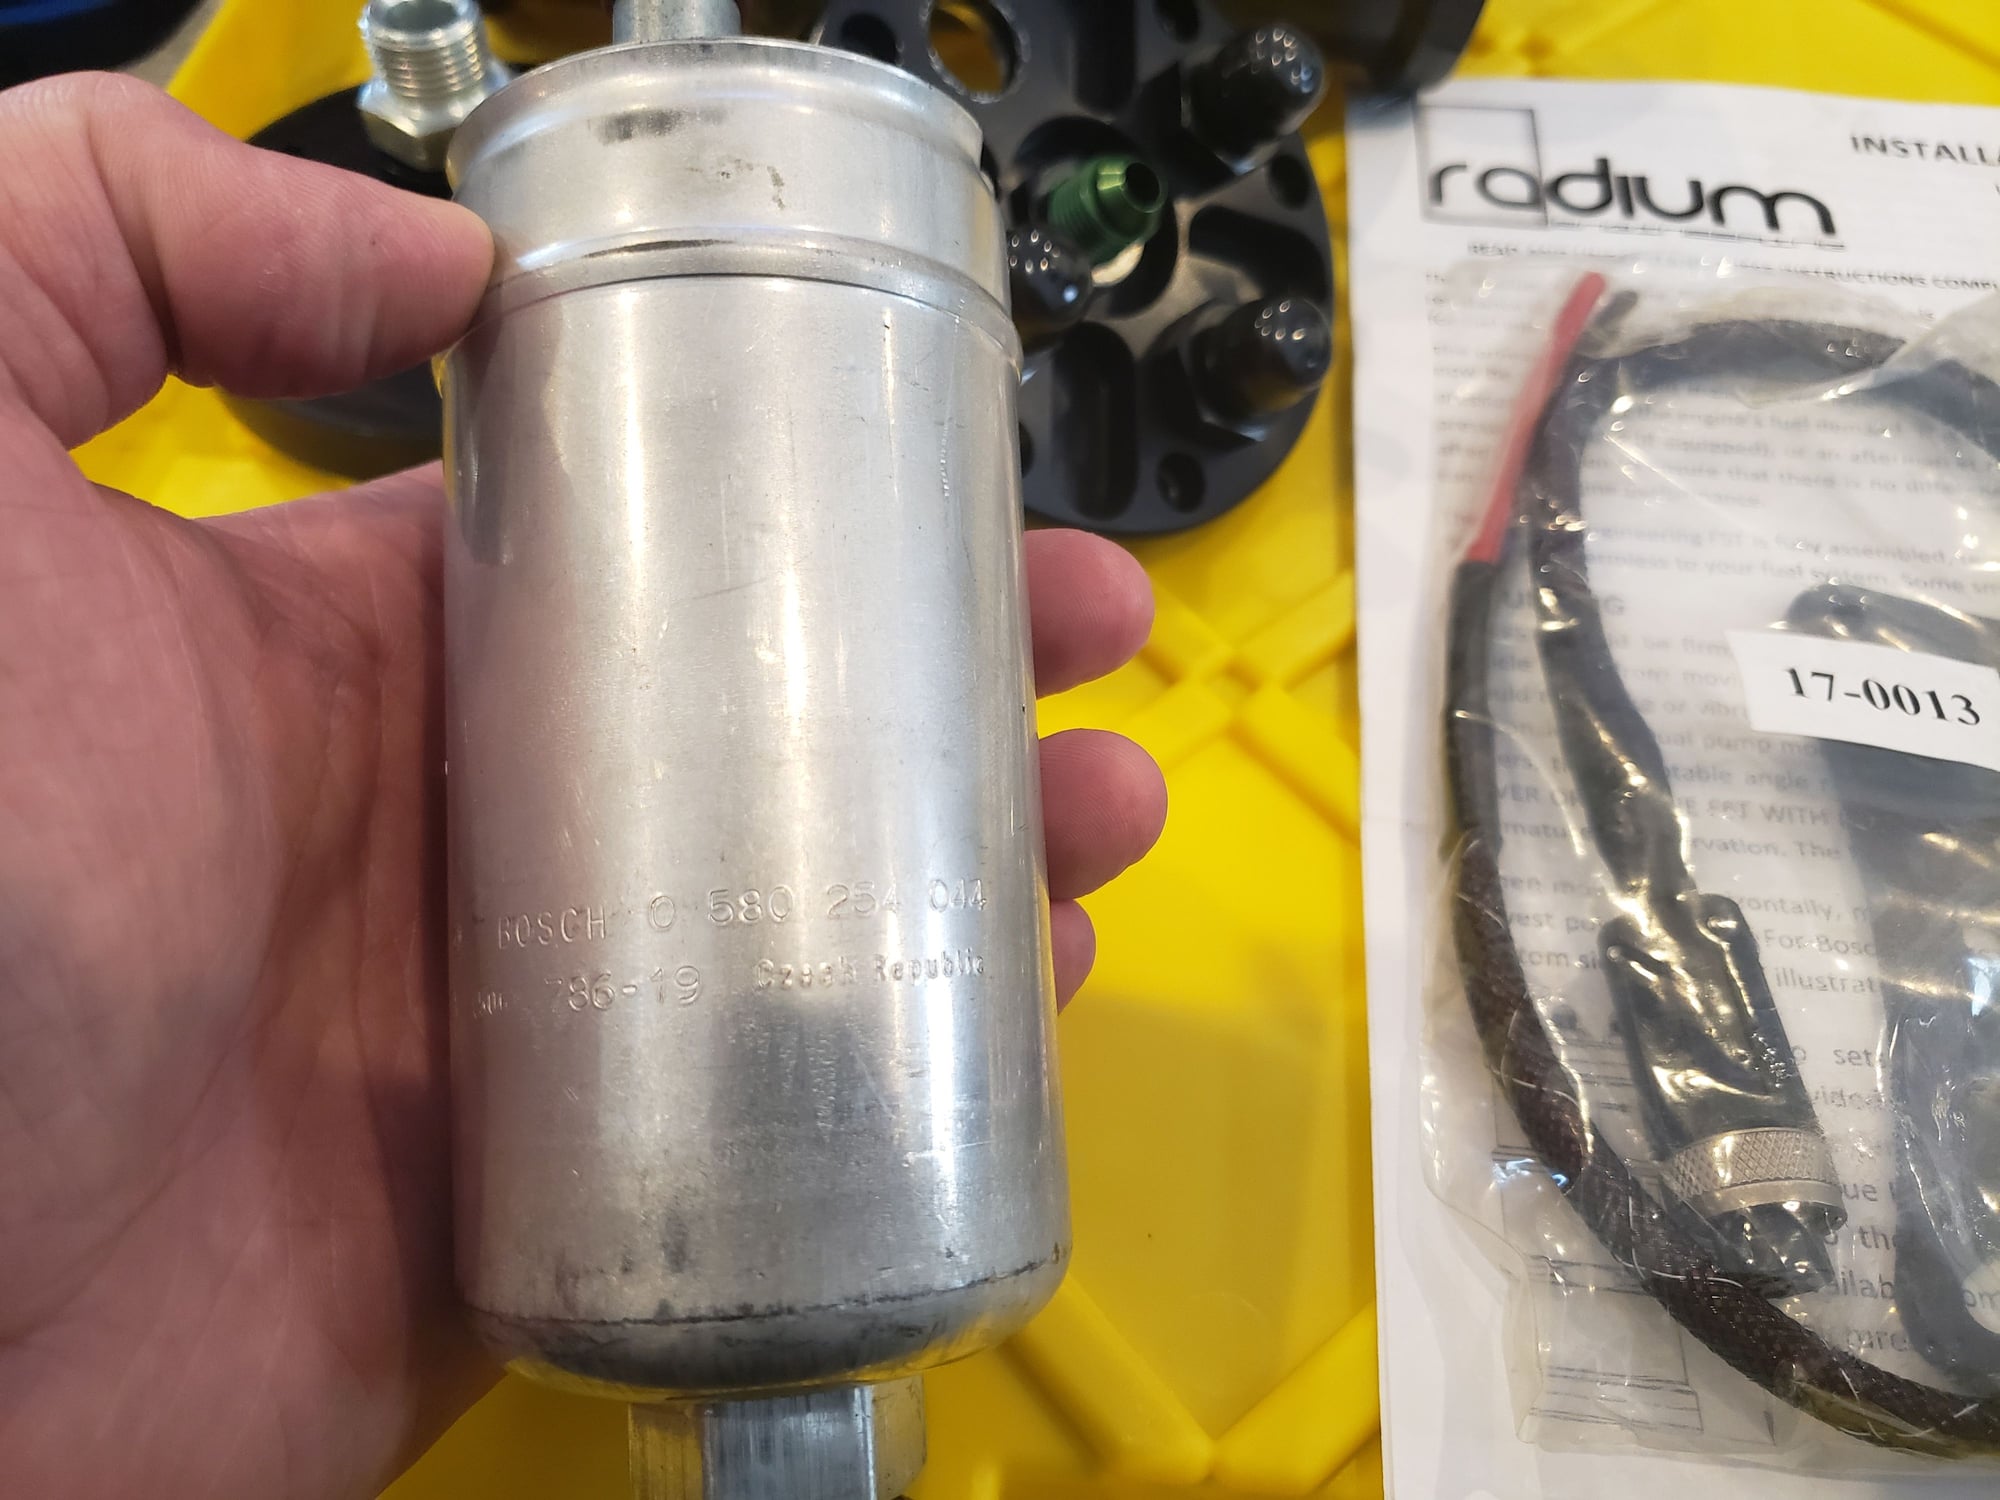 Engine - Intake/Fuel - Radium Surge Tank and Bosch 044 - New - All Years Any Make All Models - Nokesville, VA 20181, United States